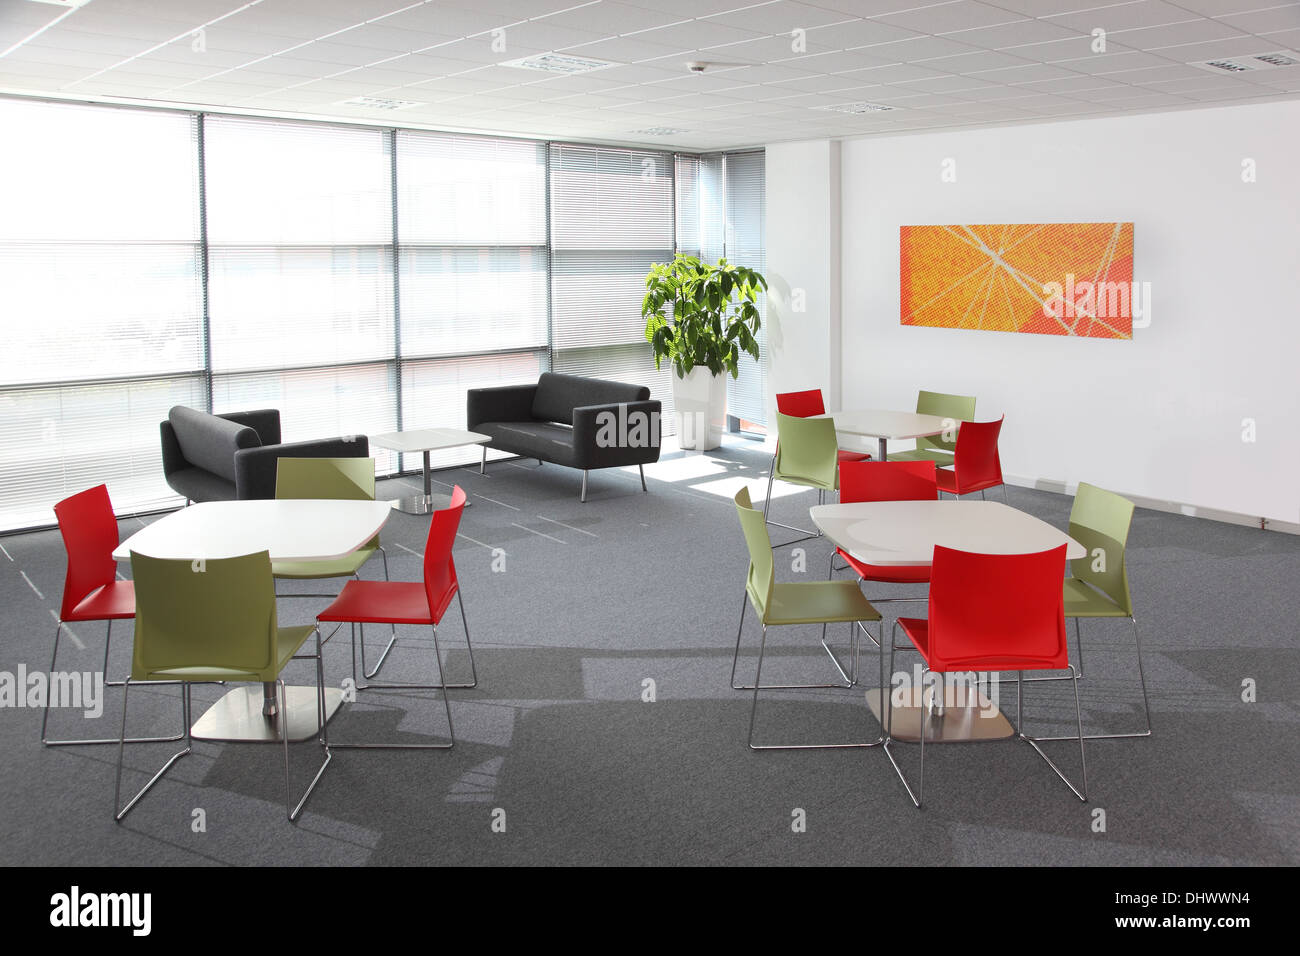 A waiting area, meeting and canteen space in a modern serviced office building Stock Photo